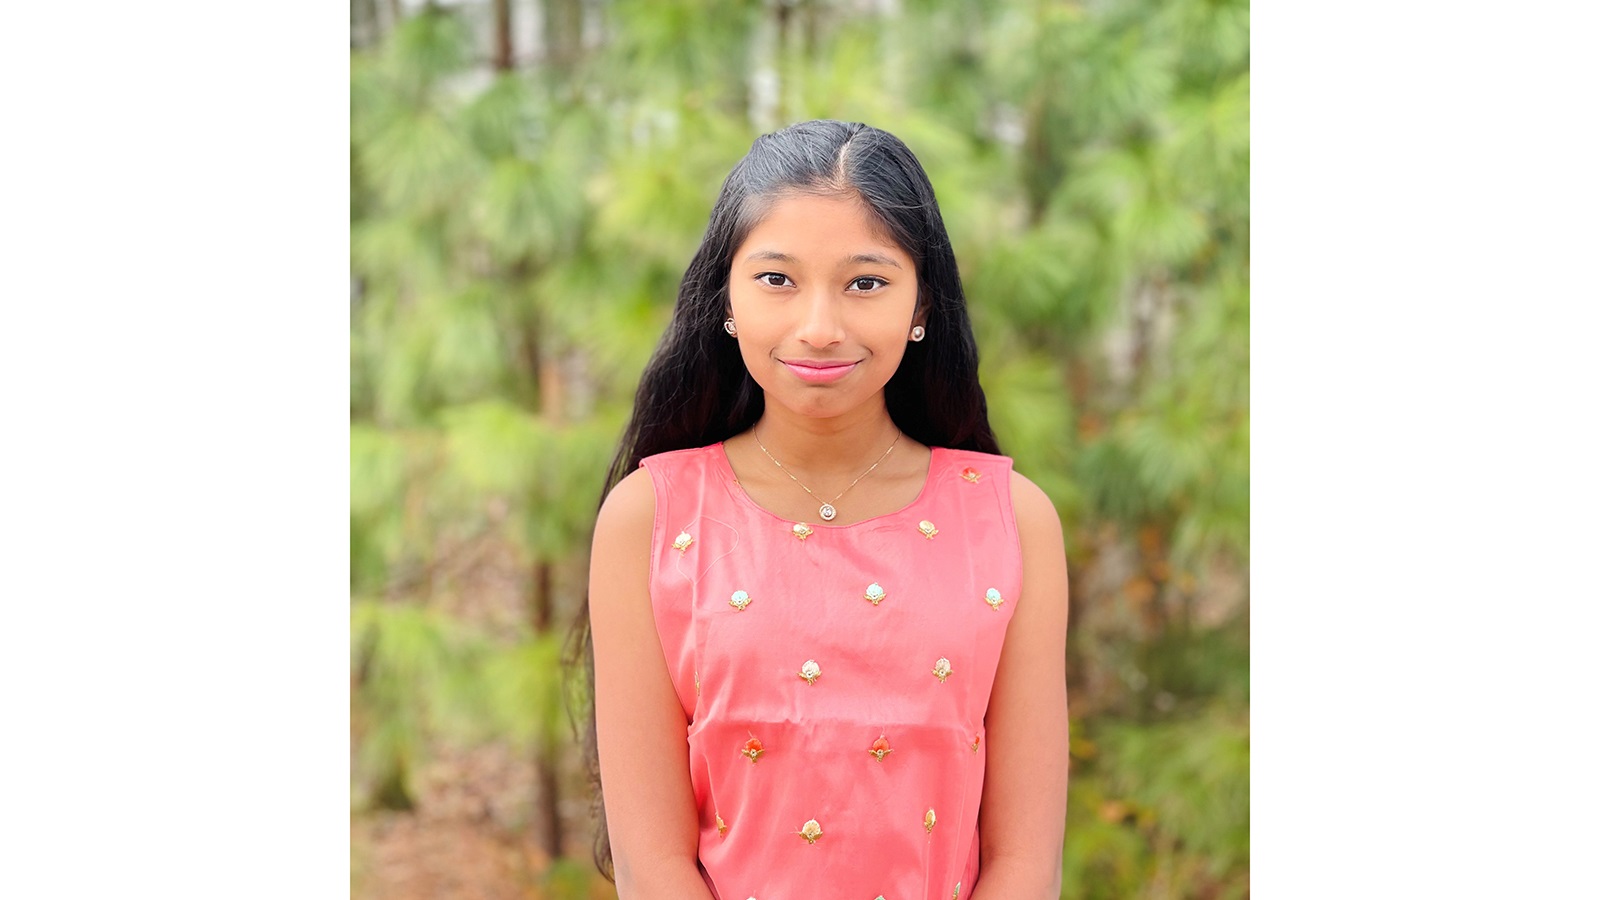 Vibhasri Yama, currently in 9th grade at Dundee-Crown High School, has greatly appreciated her time on the council, and she looks forward to the upcoming Everyday STEM Summit that she is helping to organize. (Image by Vibhasri Yama.)